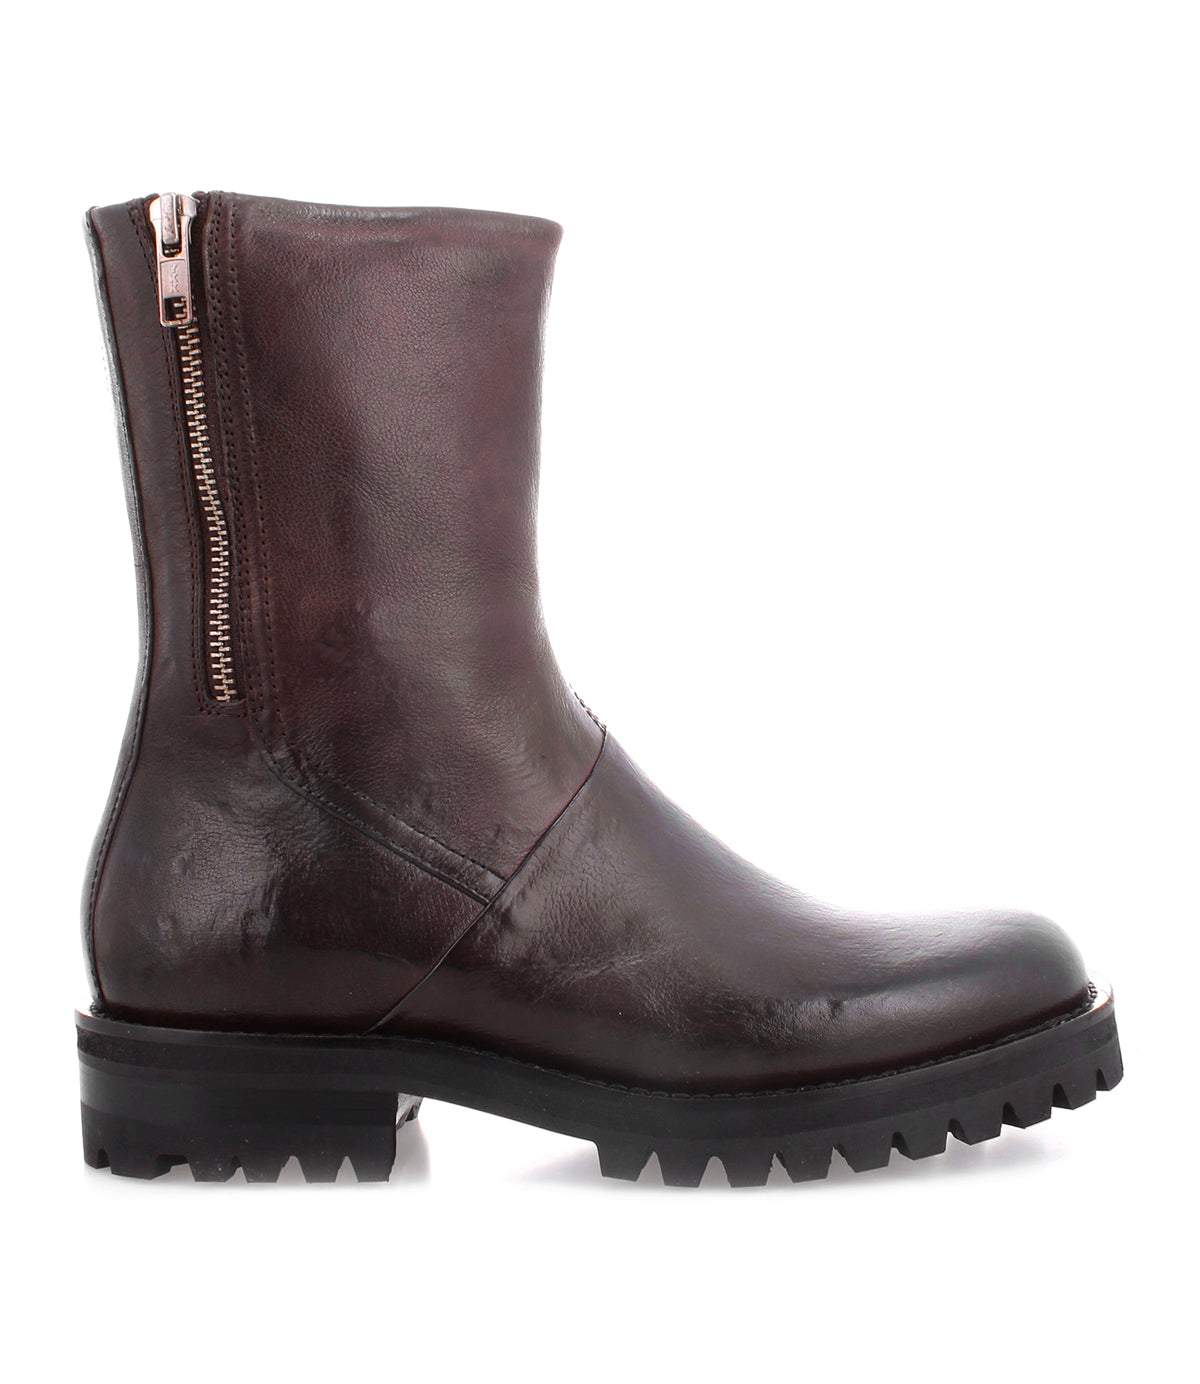 A durable brown Bed Stu Italian leather ankle boot with a convenient side zipper.